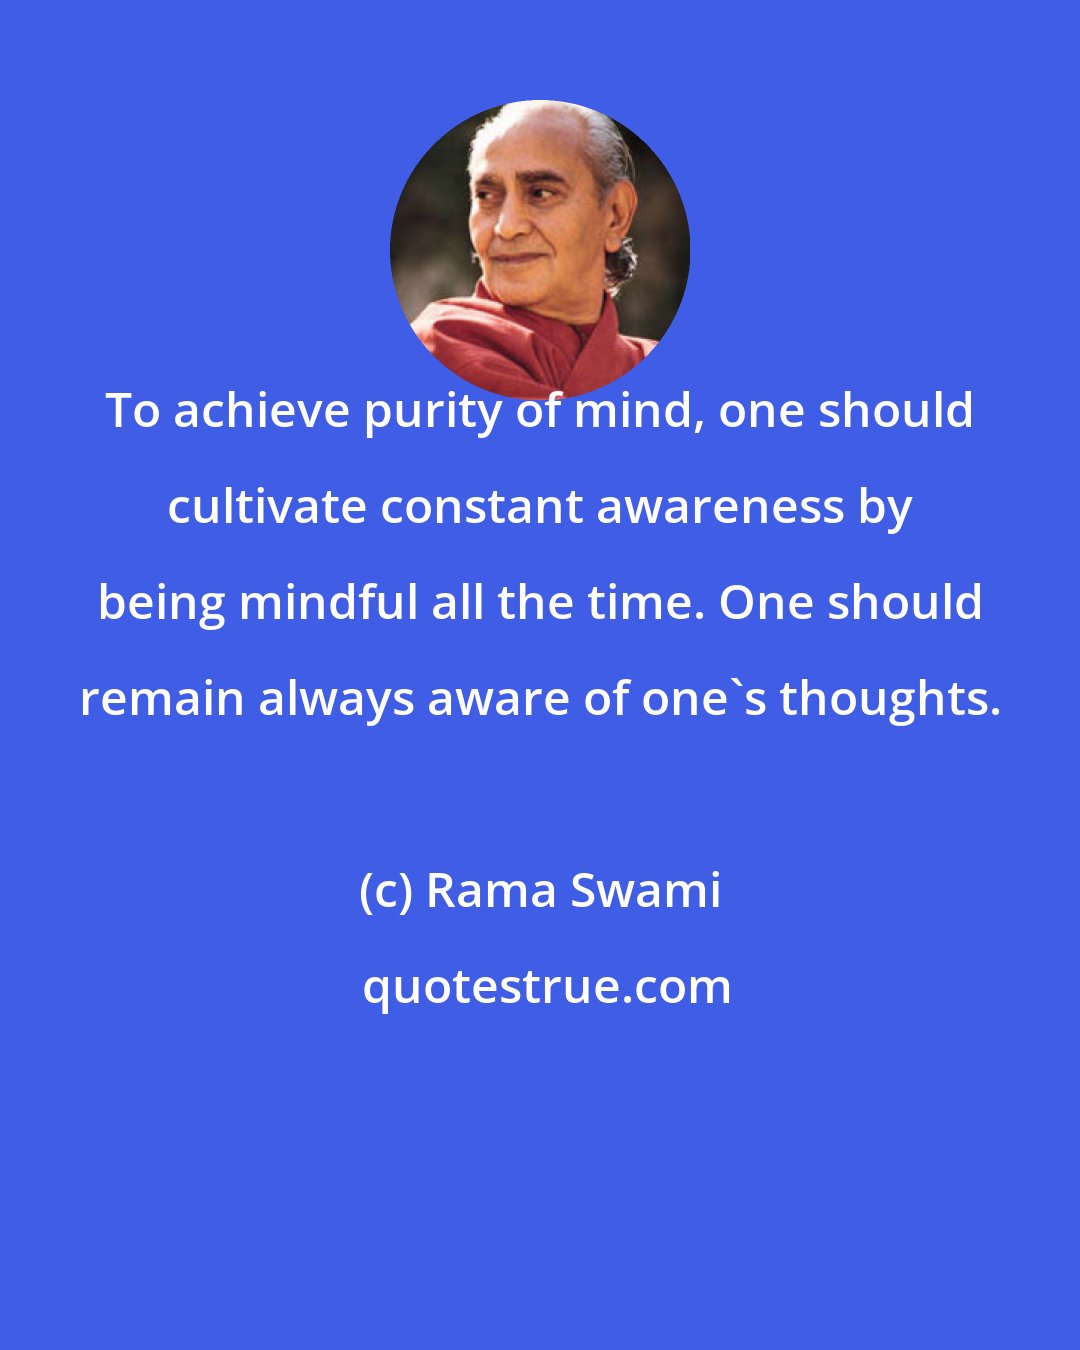 Rama Swami: To achieve purity of mind, one should cultivate constant awareness by being mindful all the time. One should remain always aware of one's thoughts.